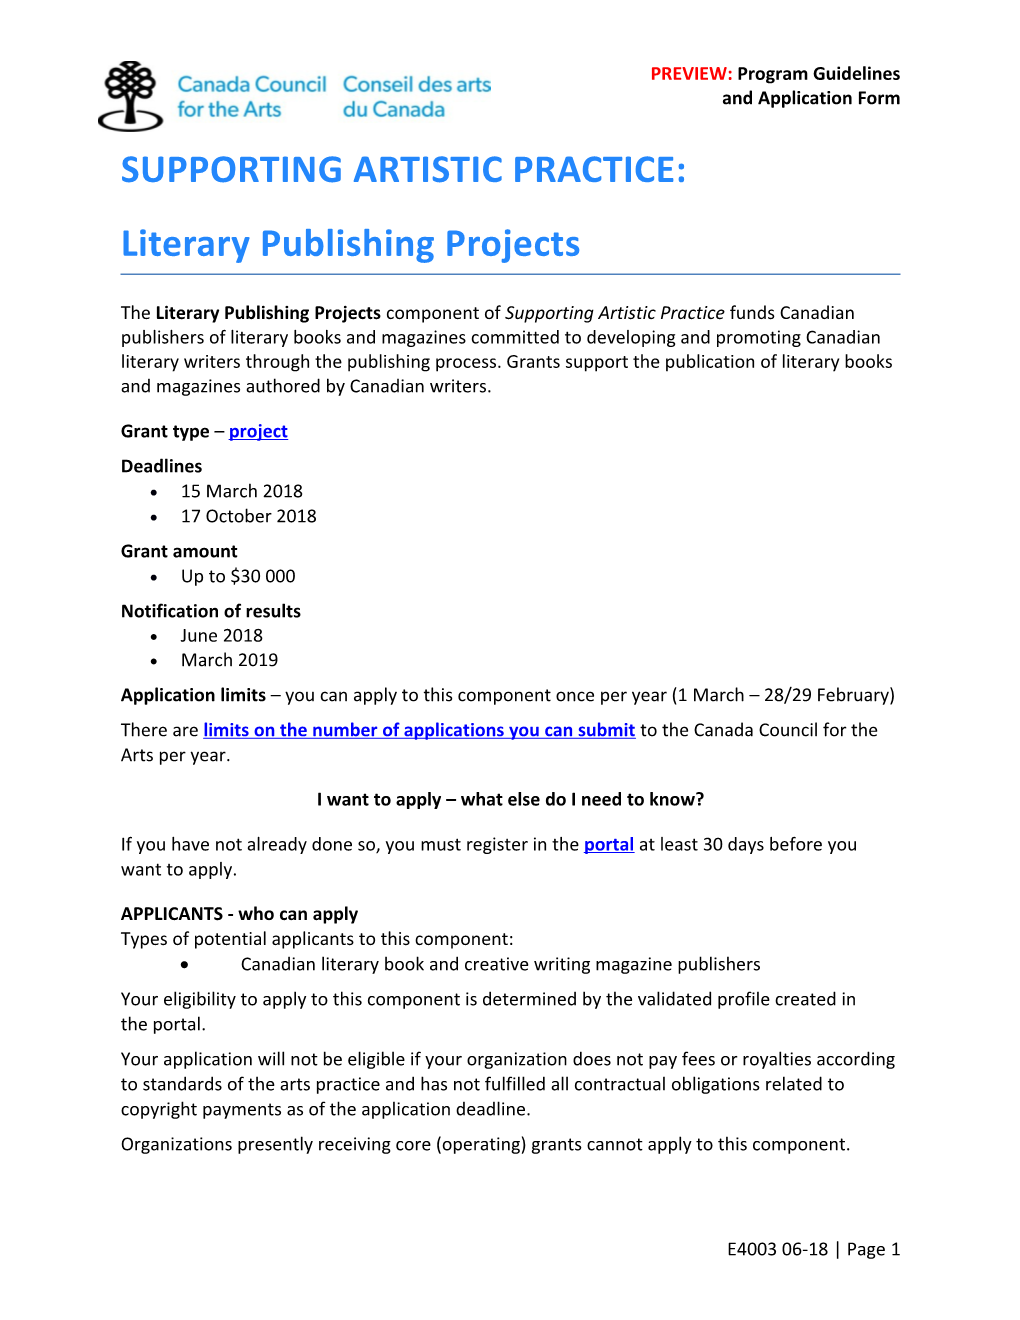 Supporting Artistic Practice